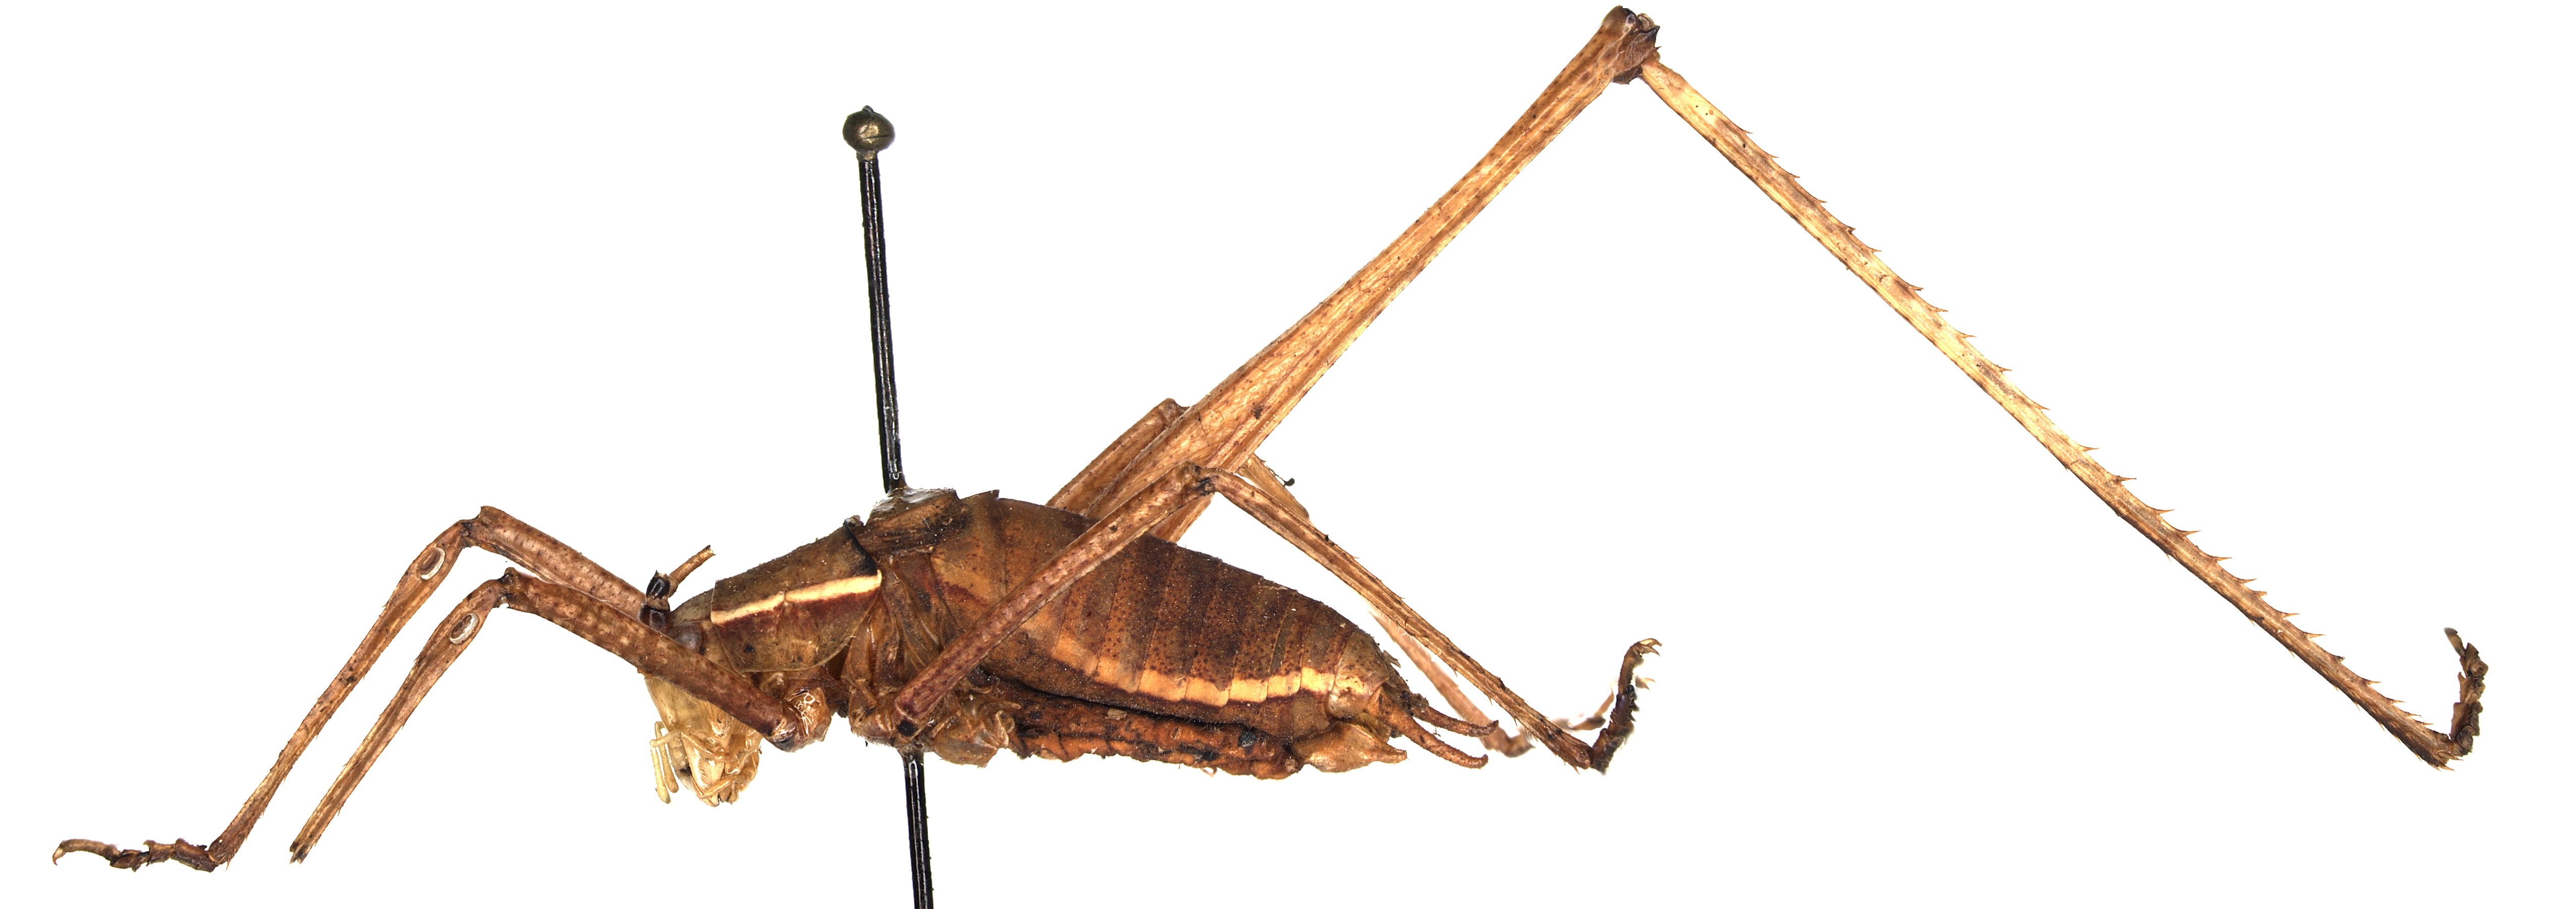 male, lateral view (holotype). Depicts CollectionObject 1475949; 5edddf05-fc47-4cee-8c61-69c5ebe48352, a CollectionObject.